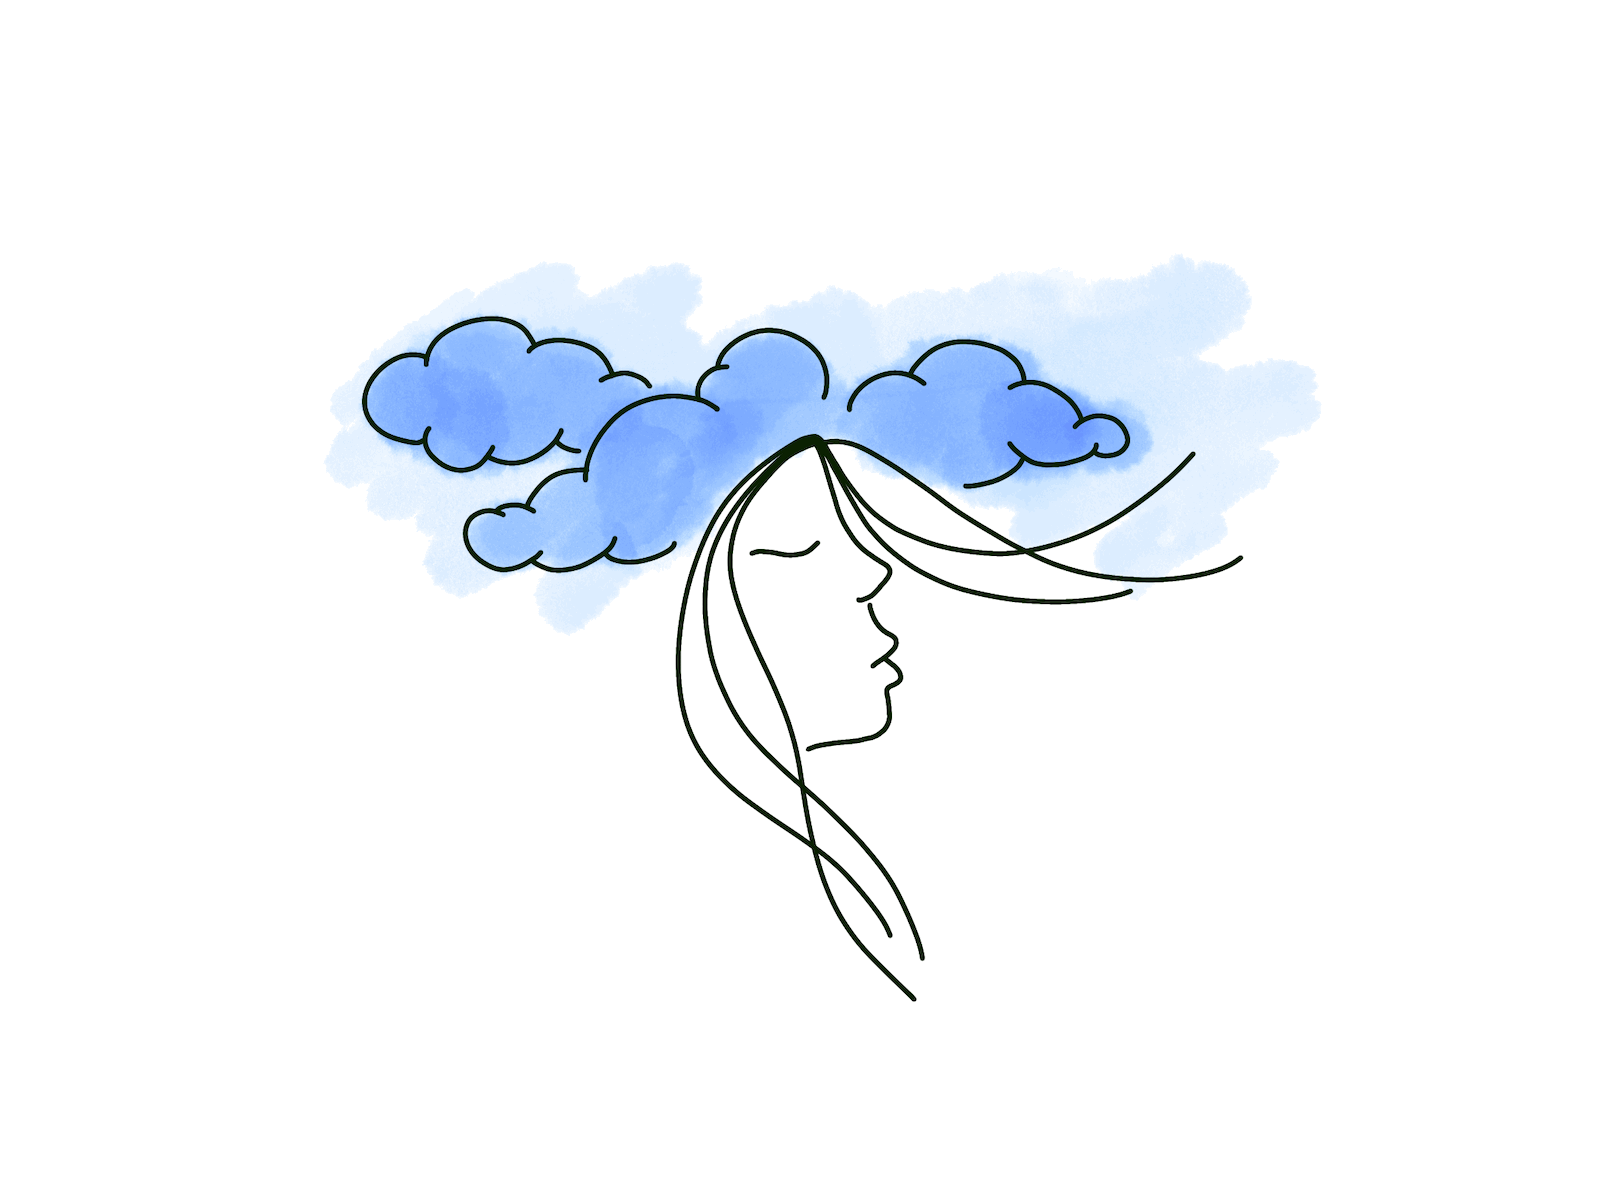 daydreamer animation aquarell art clouds daydreamer dream head heaven illustration in line lineart procreate simple the